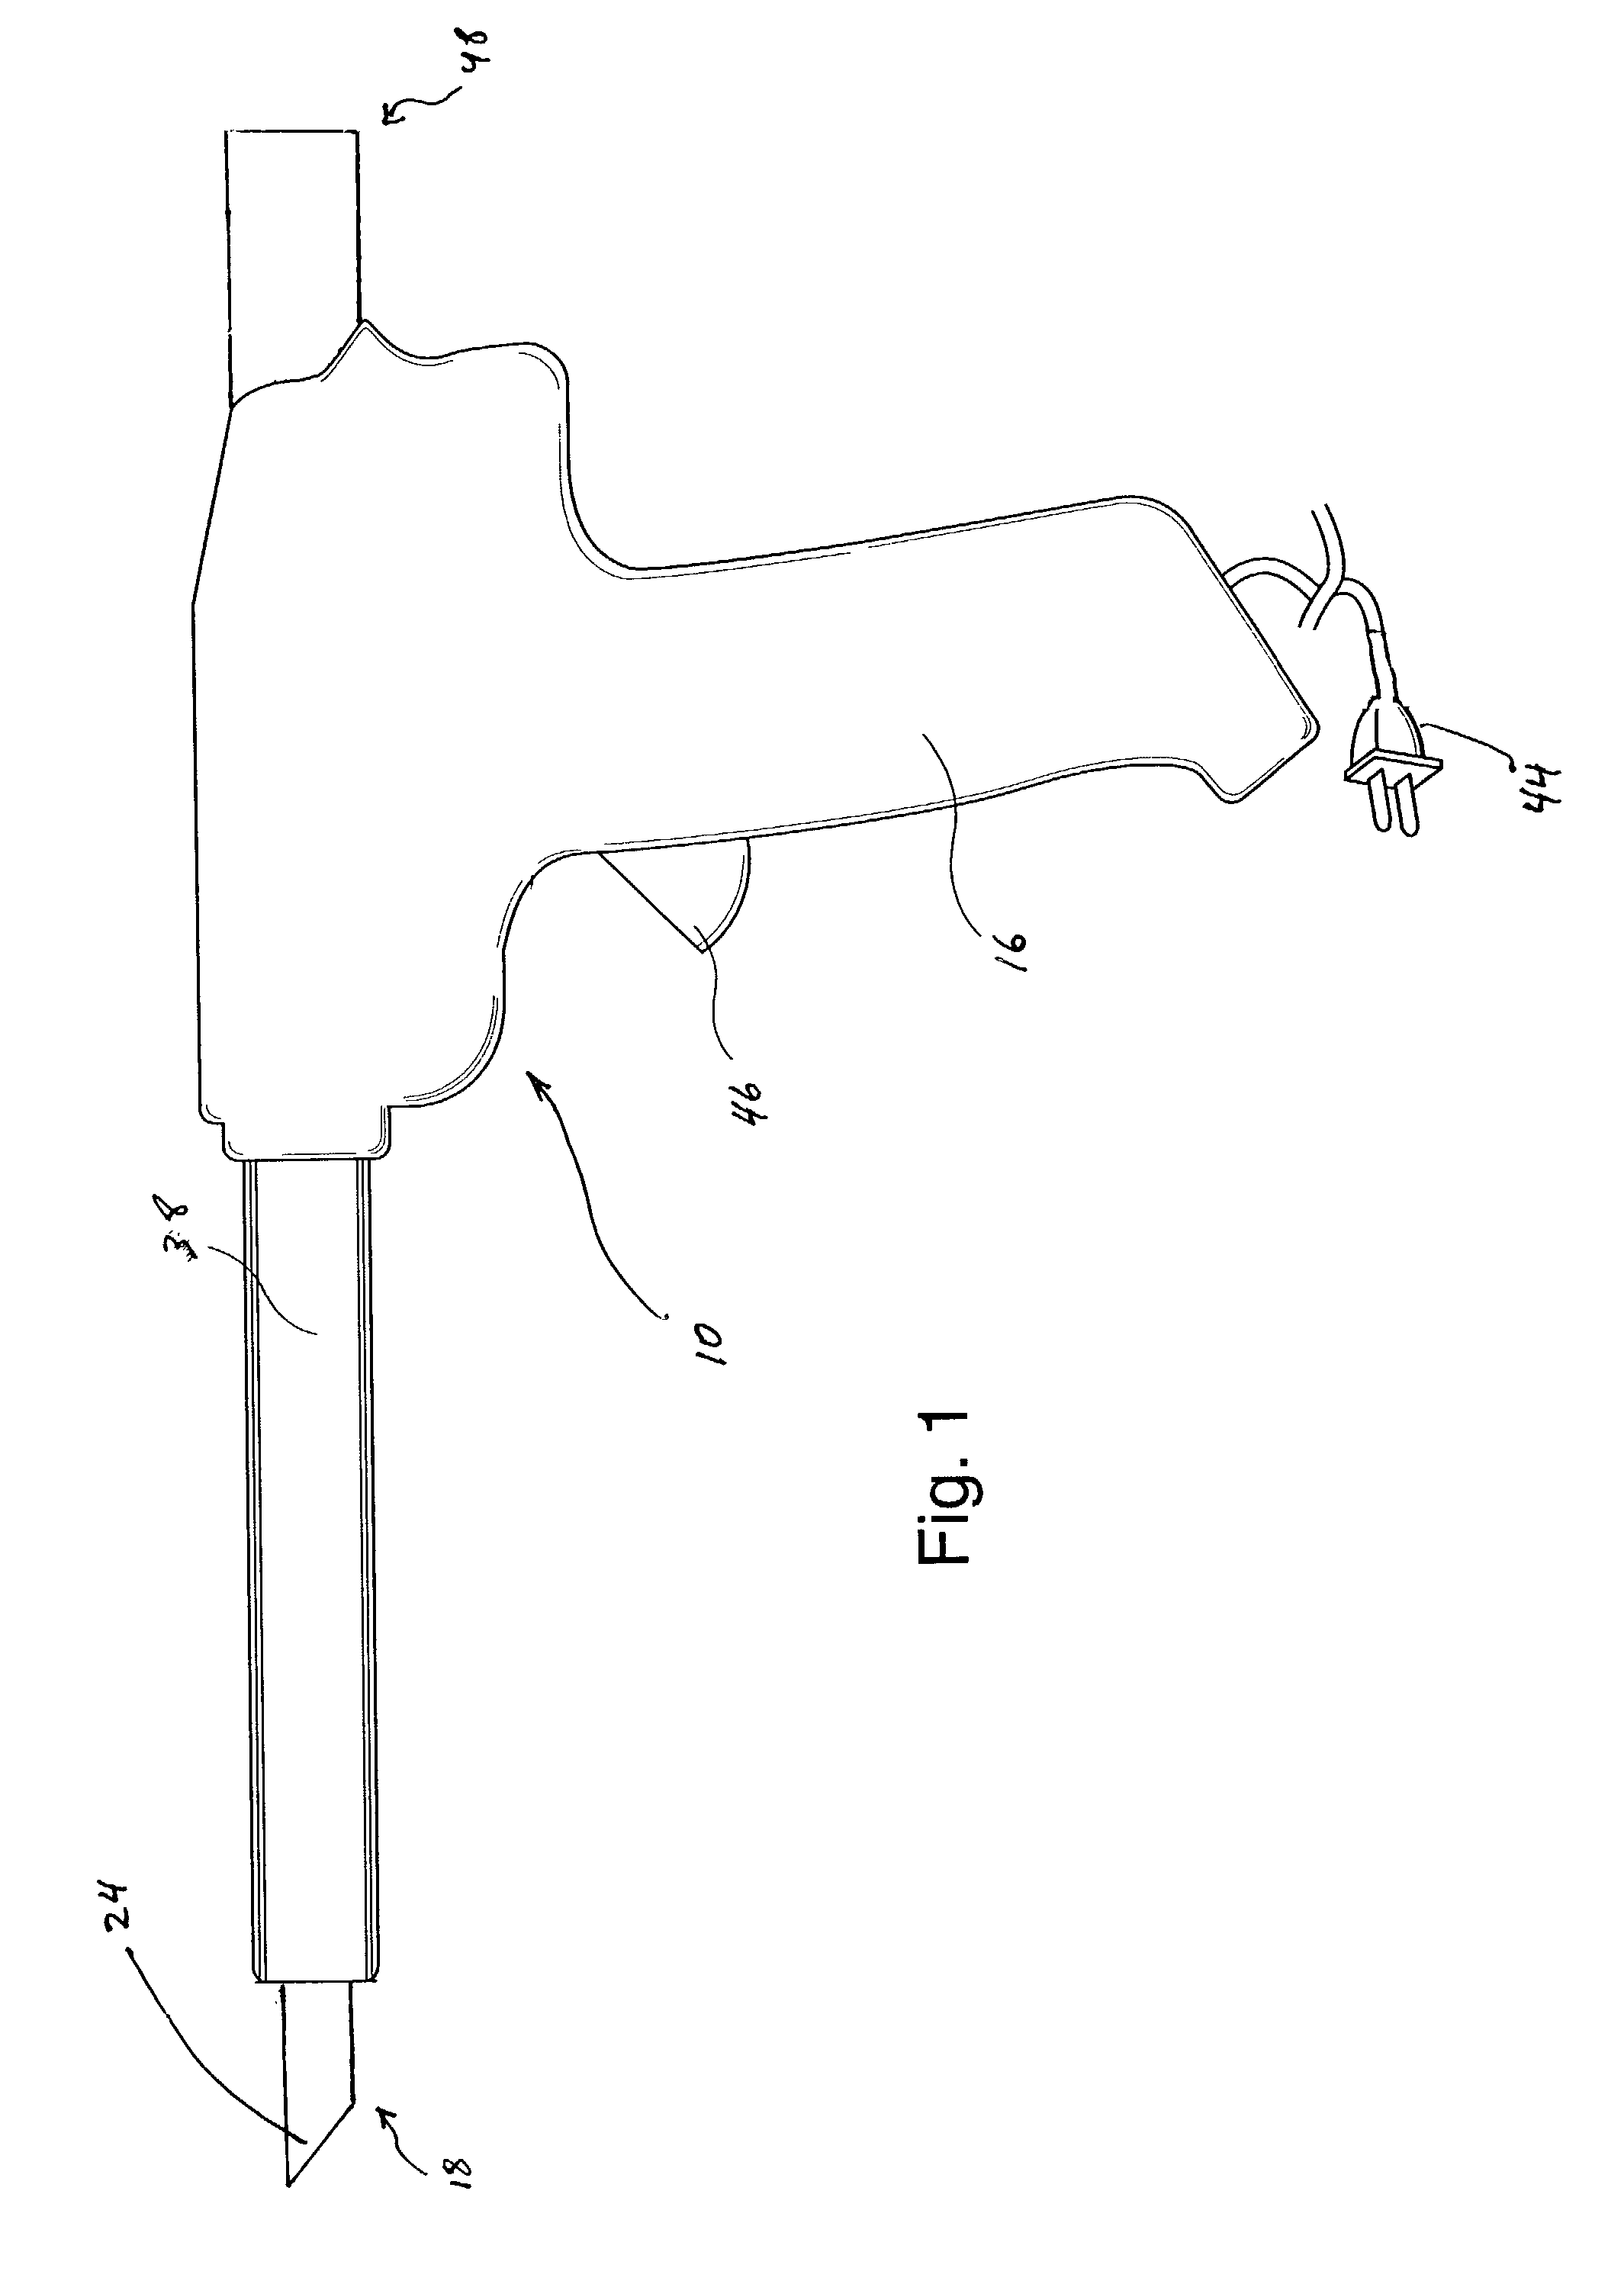 Device and method for exposing a candle wick embedded in candle wax